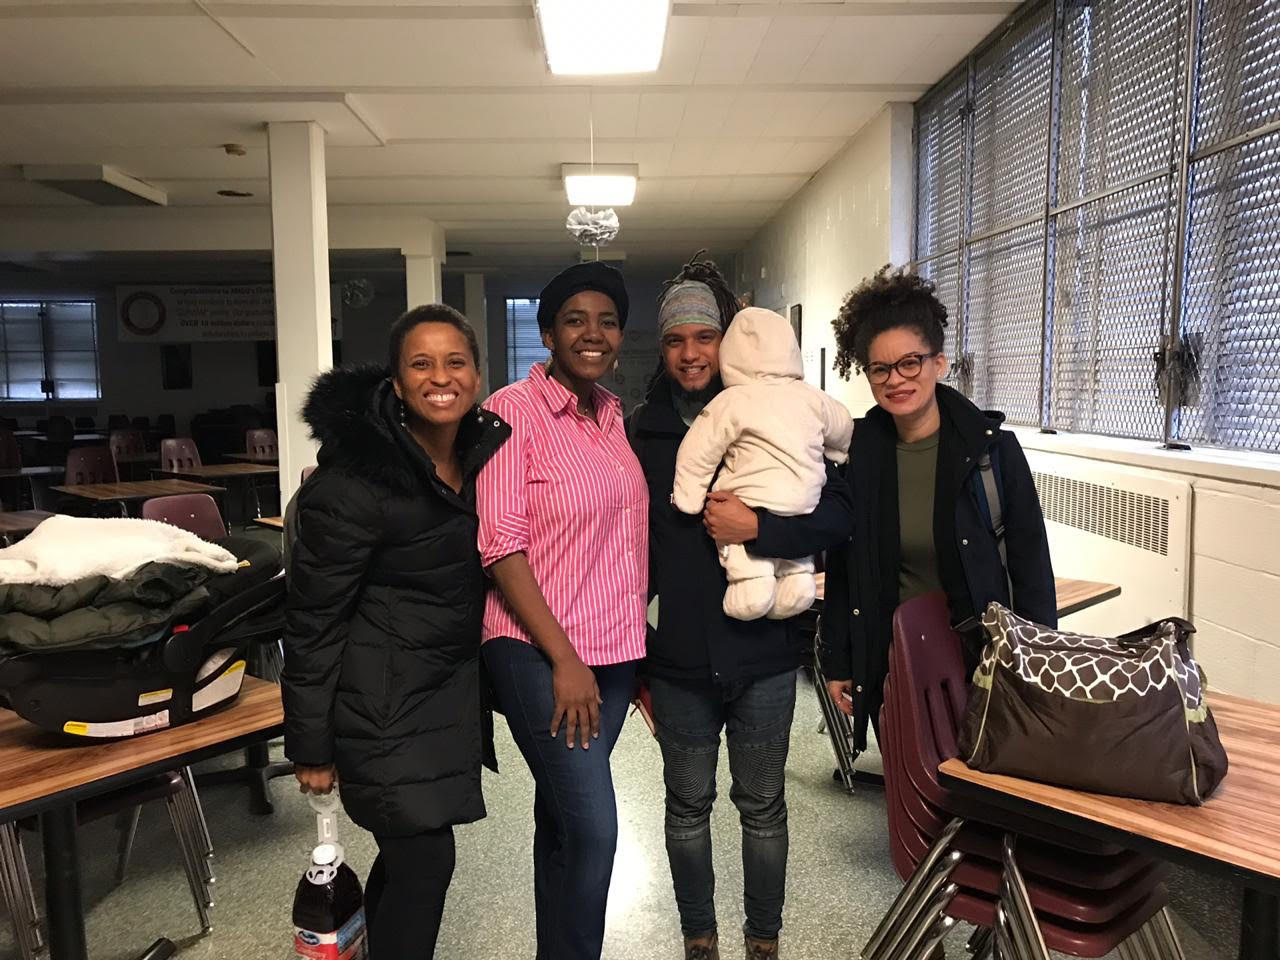 Miriam Neptune, Altagracia Jean Joseph, Alexis Francisco, and another facilitator stand in a row posing for the photo. Miriam is also holding a baby.